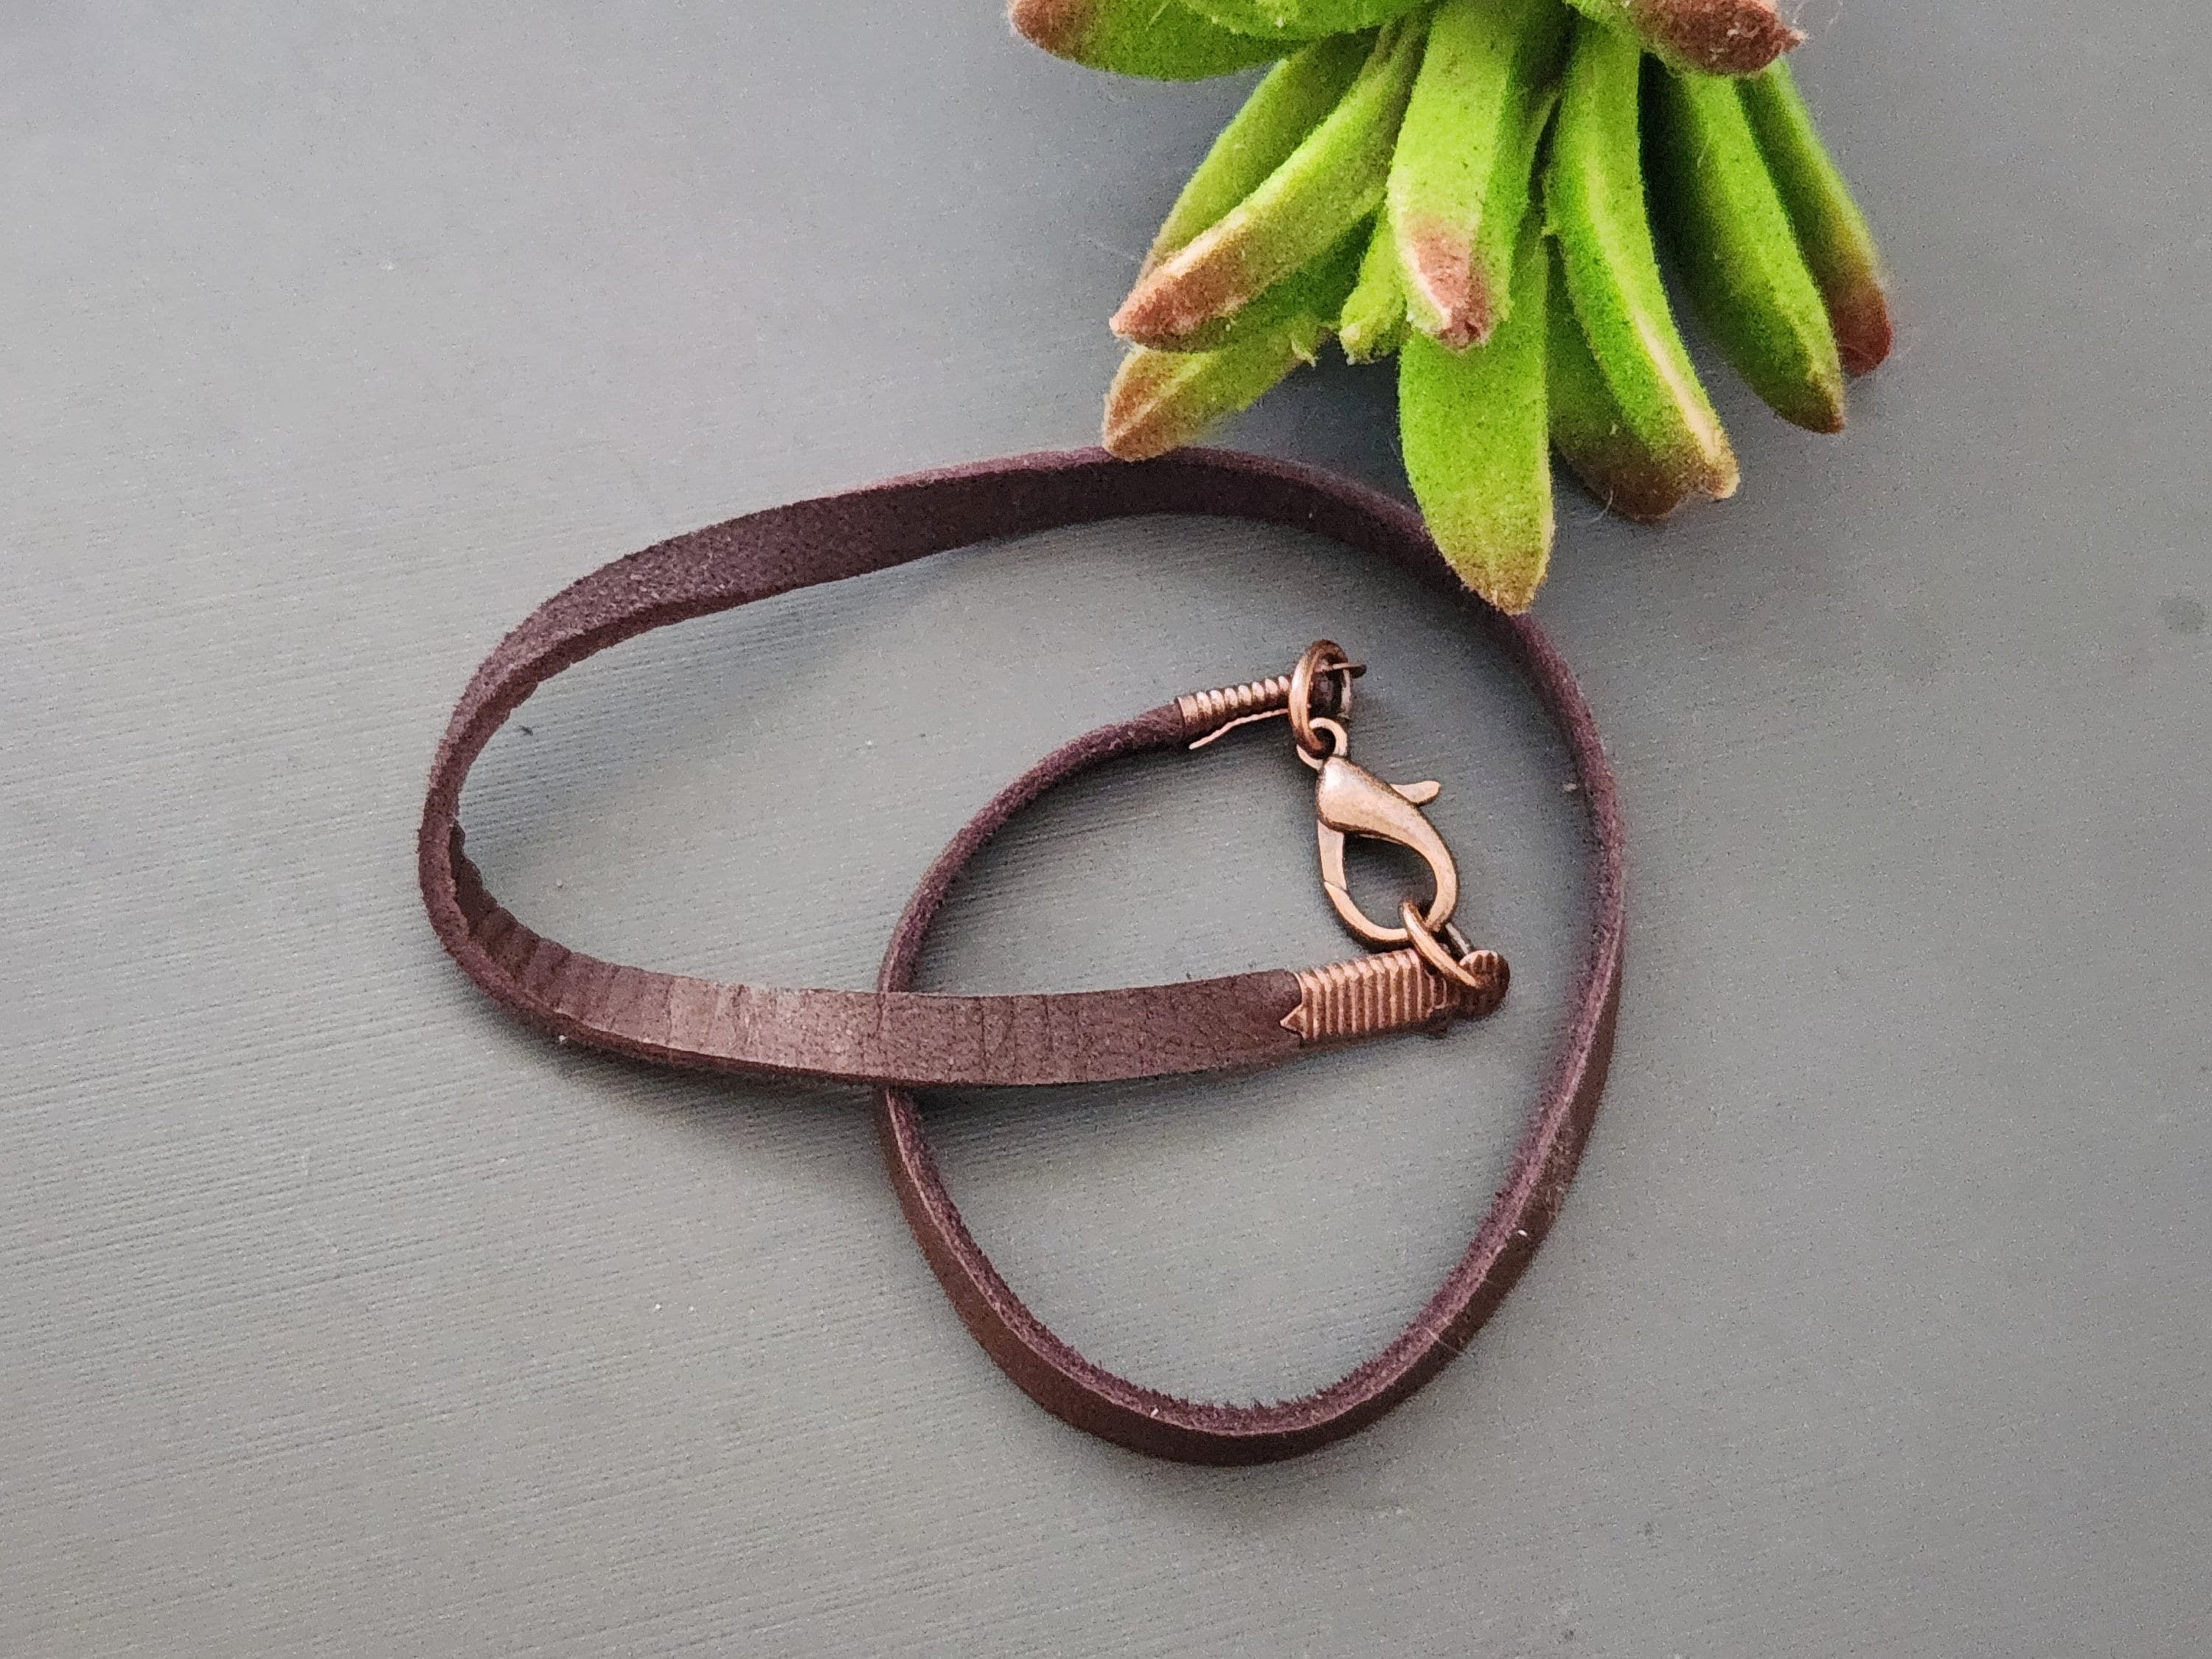 Necklace for Pendant Charm, Thin Leather Cord Necklace for Pendant, Leather String Necklace with Metal Clasp Locking Closure Custom Length